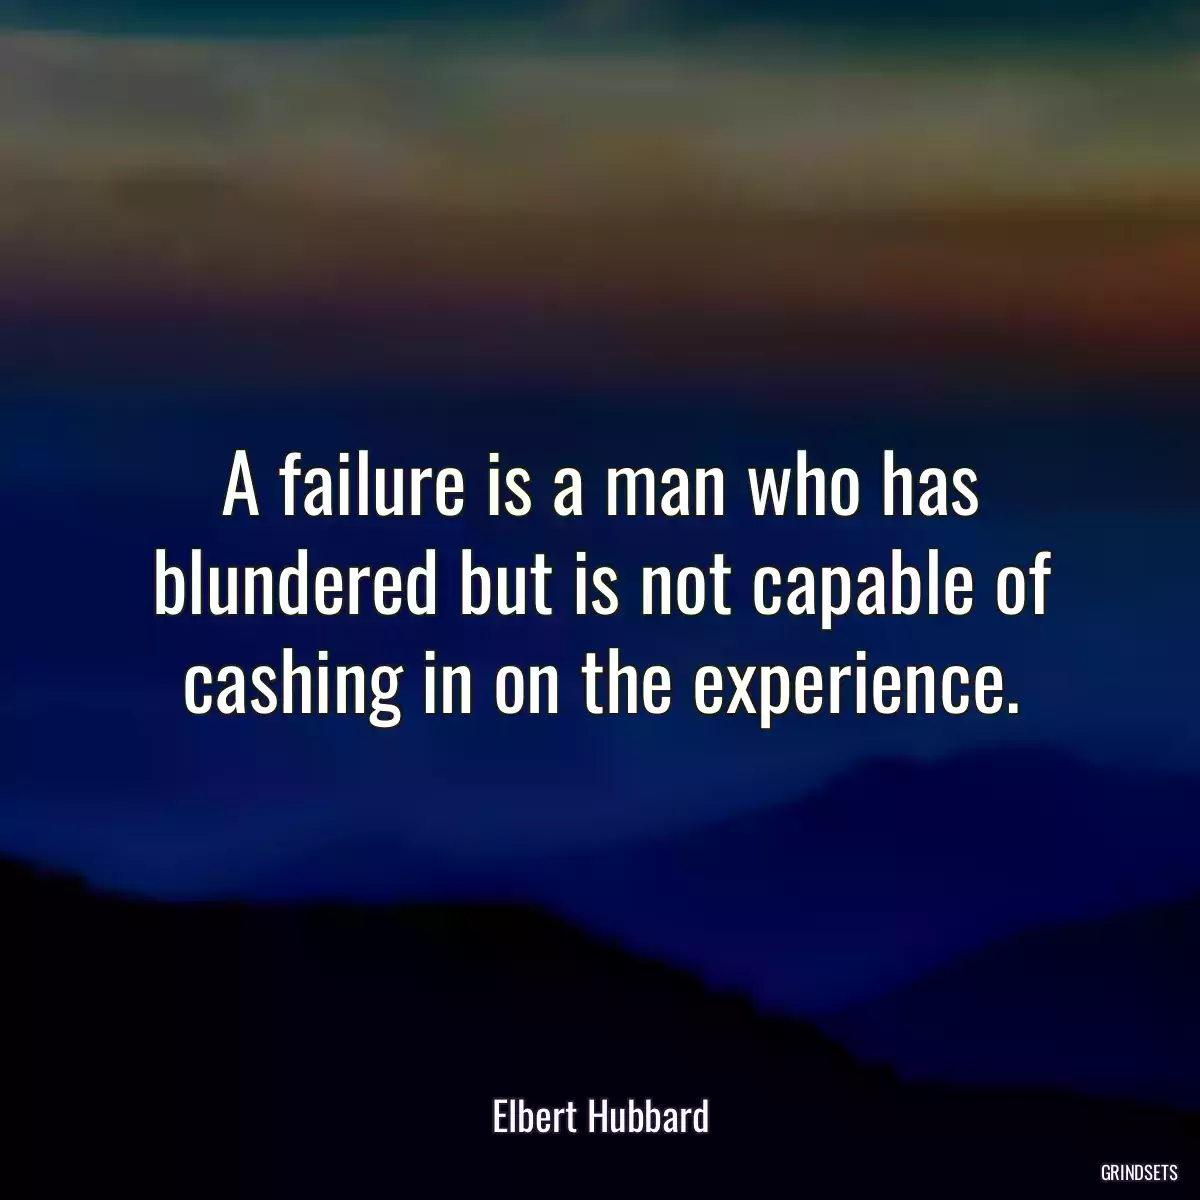 A failure is a man who has blundered but is not capable of cashing in on the experience.